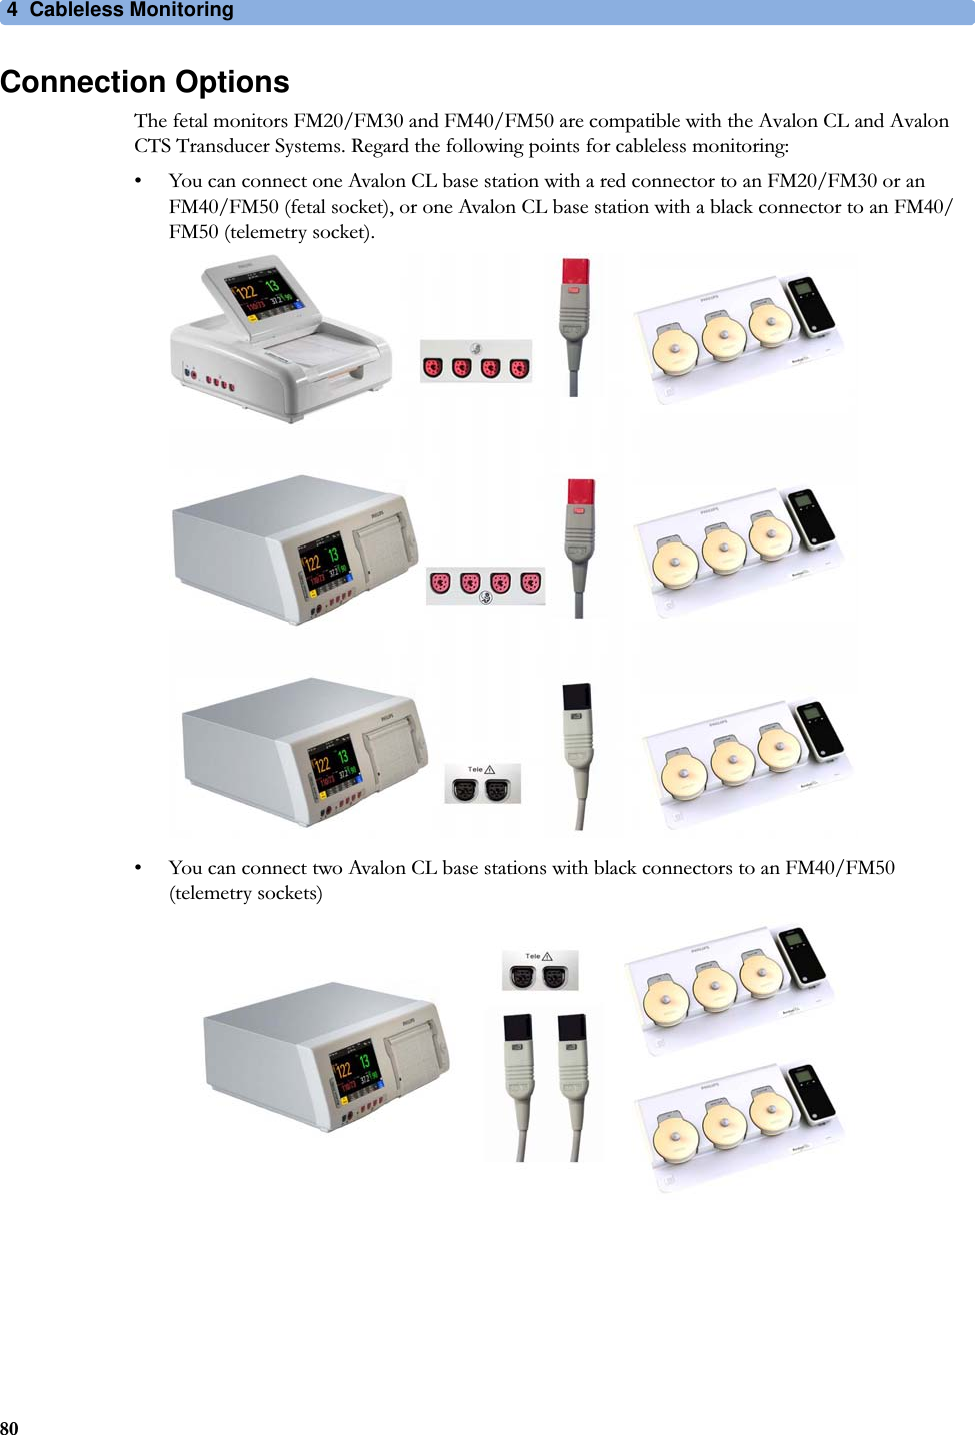 4  Cableless Monitoring80Connection OptionsThe fetal monitors FM20/FM30 and FM40/FM50 are compatible with the Avalon CL and Avalon CTS Transducer Systems. Regard the following points for cableless monitoring:• You can connect one Avalon CL base station with a red connector to an FM20/FM30 or an FM40/FM50 (fetal socket), or one Avalon CL base station with a black connector to an FM40/FM50 (telemetry socket).• You can connect two Avalon CL base stations with black connectors to an FM40/FM50 (telemetry sockets)